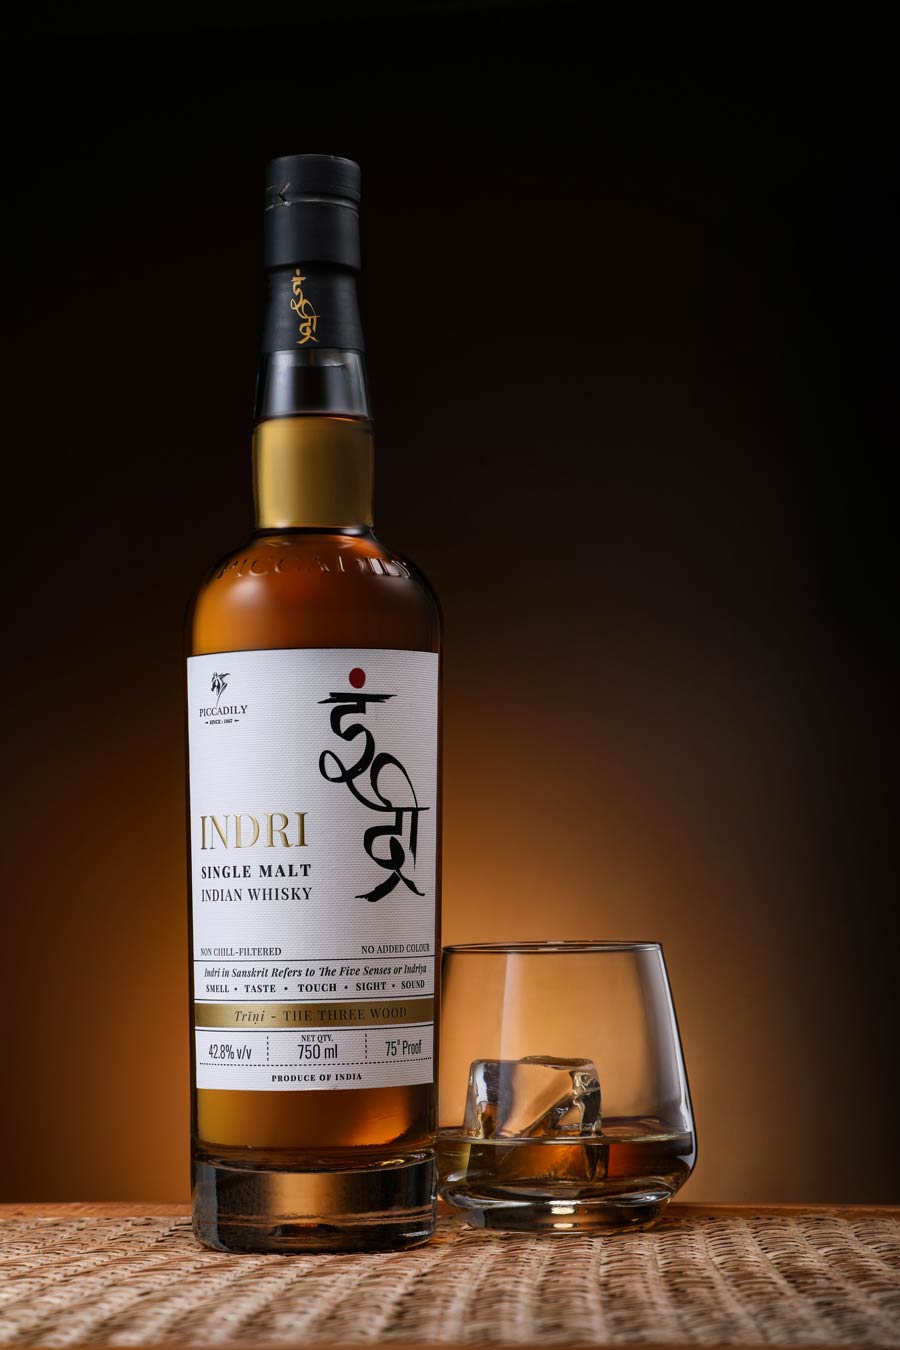 Indri-Trini: Launched late in 2021, this single malt won a Silver in the International Wine and Spirits Competition 2022. Produced in three different wooden barrels, (bourbon, wine and PX sherry casks), this Indian whisky is velvety on the tongue and offers a mellow aroma with hints of black tea. Price: Rs 3,100 for 750ml 